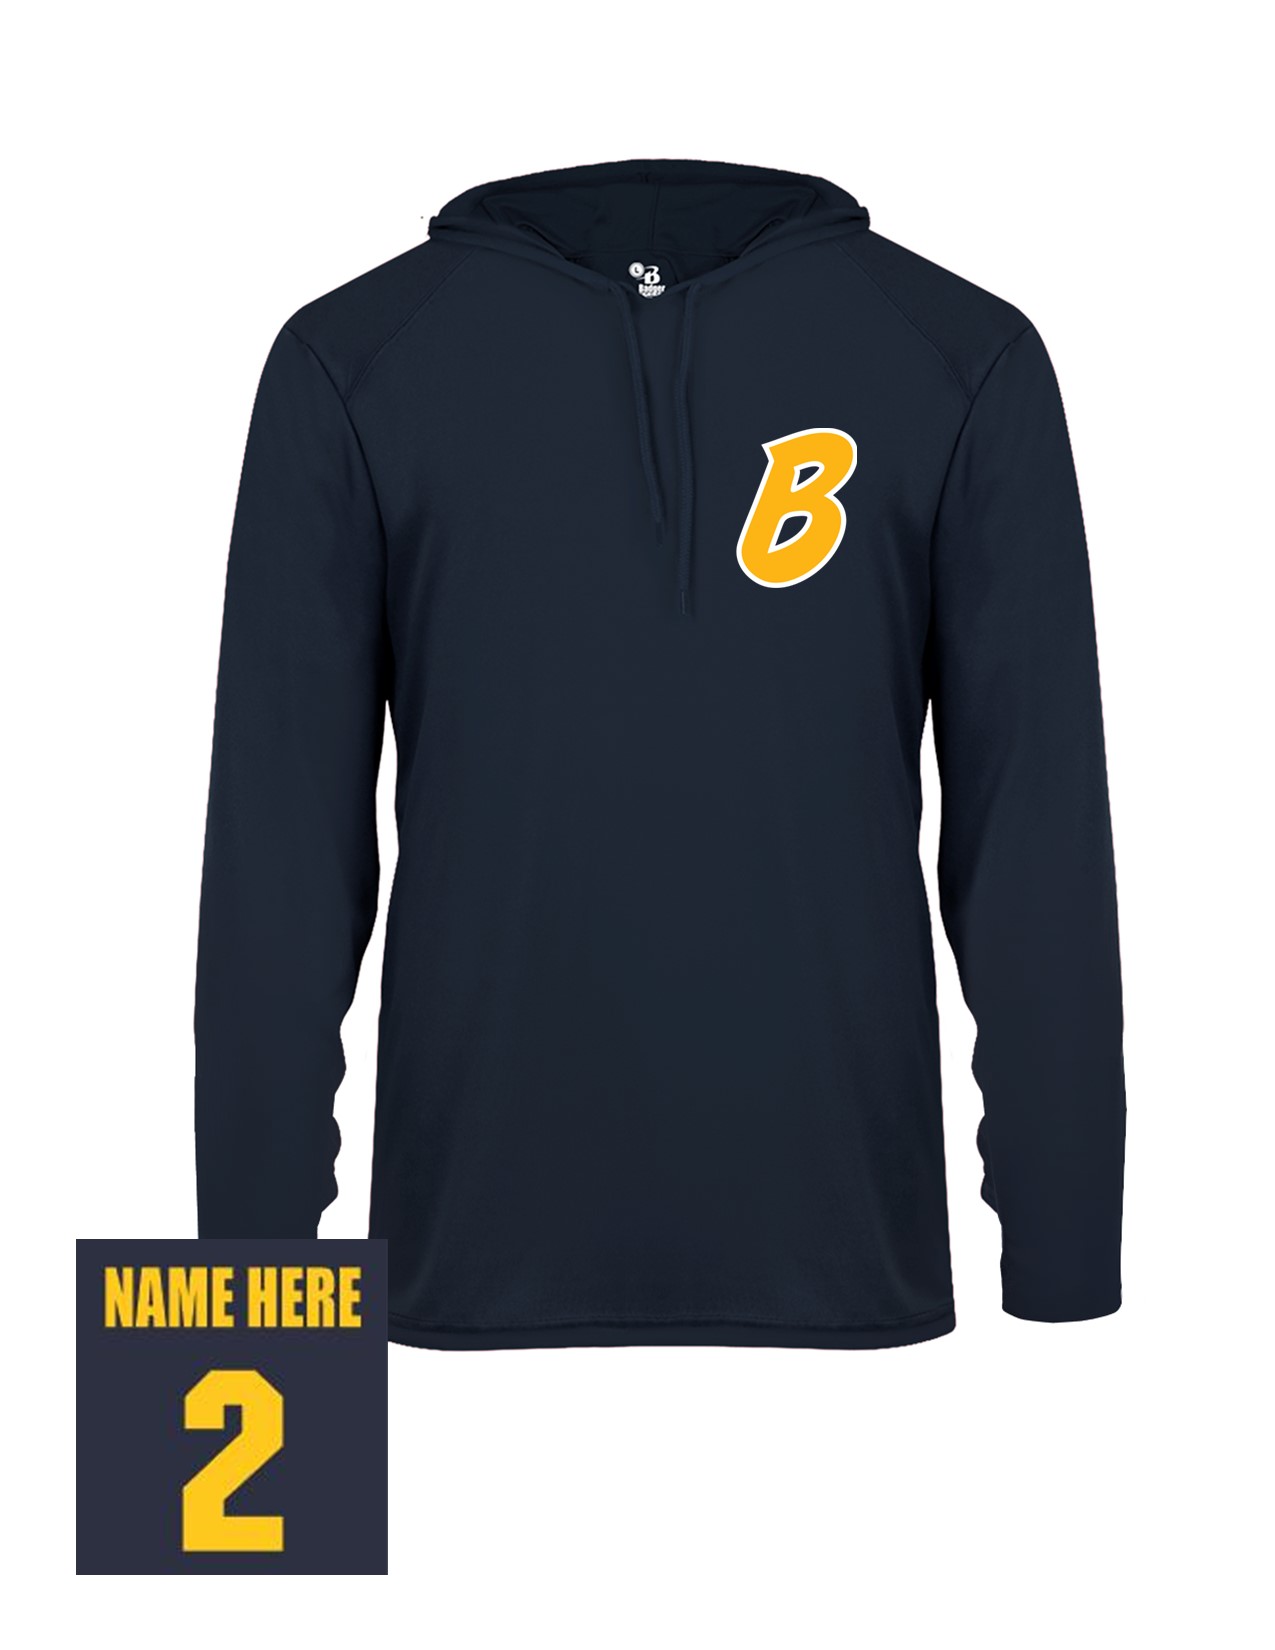 78b Badger 2105 Youth B-Core Performance 100% Poly Wicking Hooded Tee with Bombers "B" LC Logo